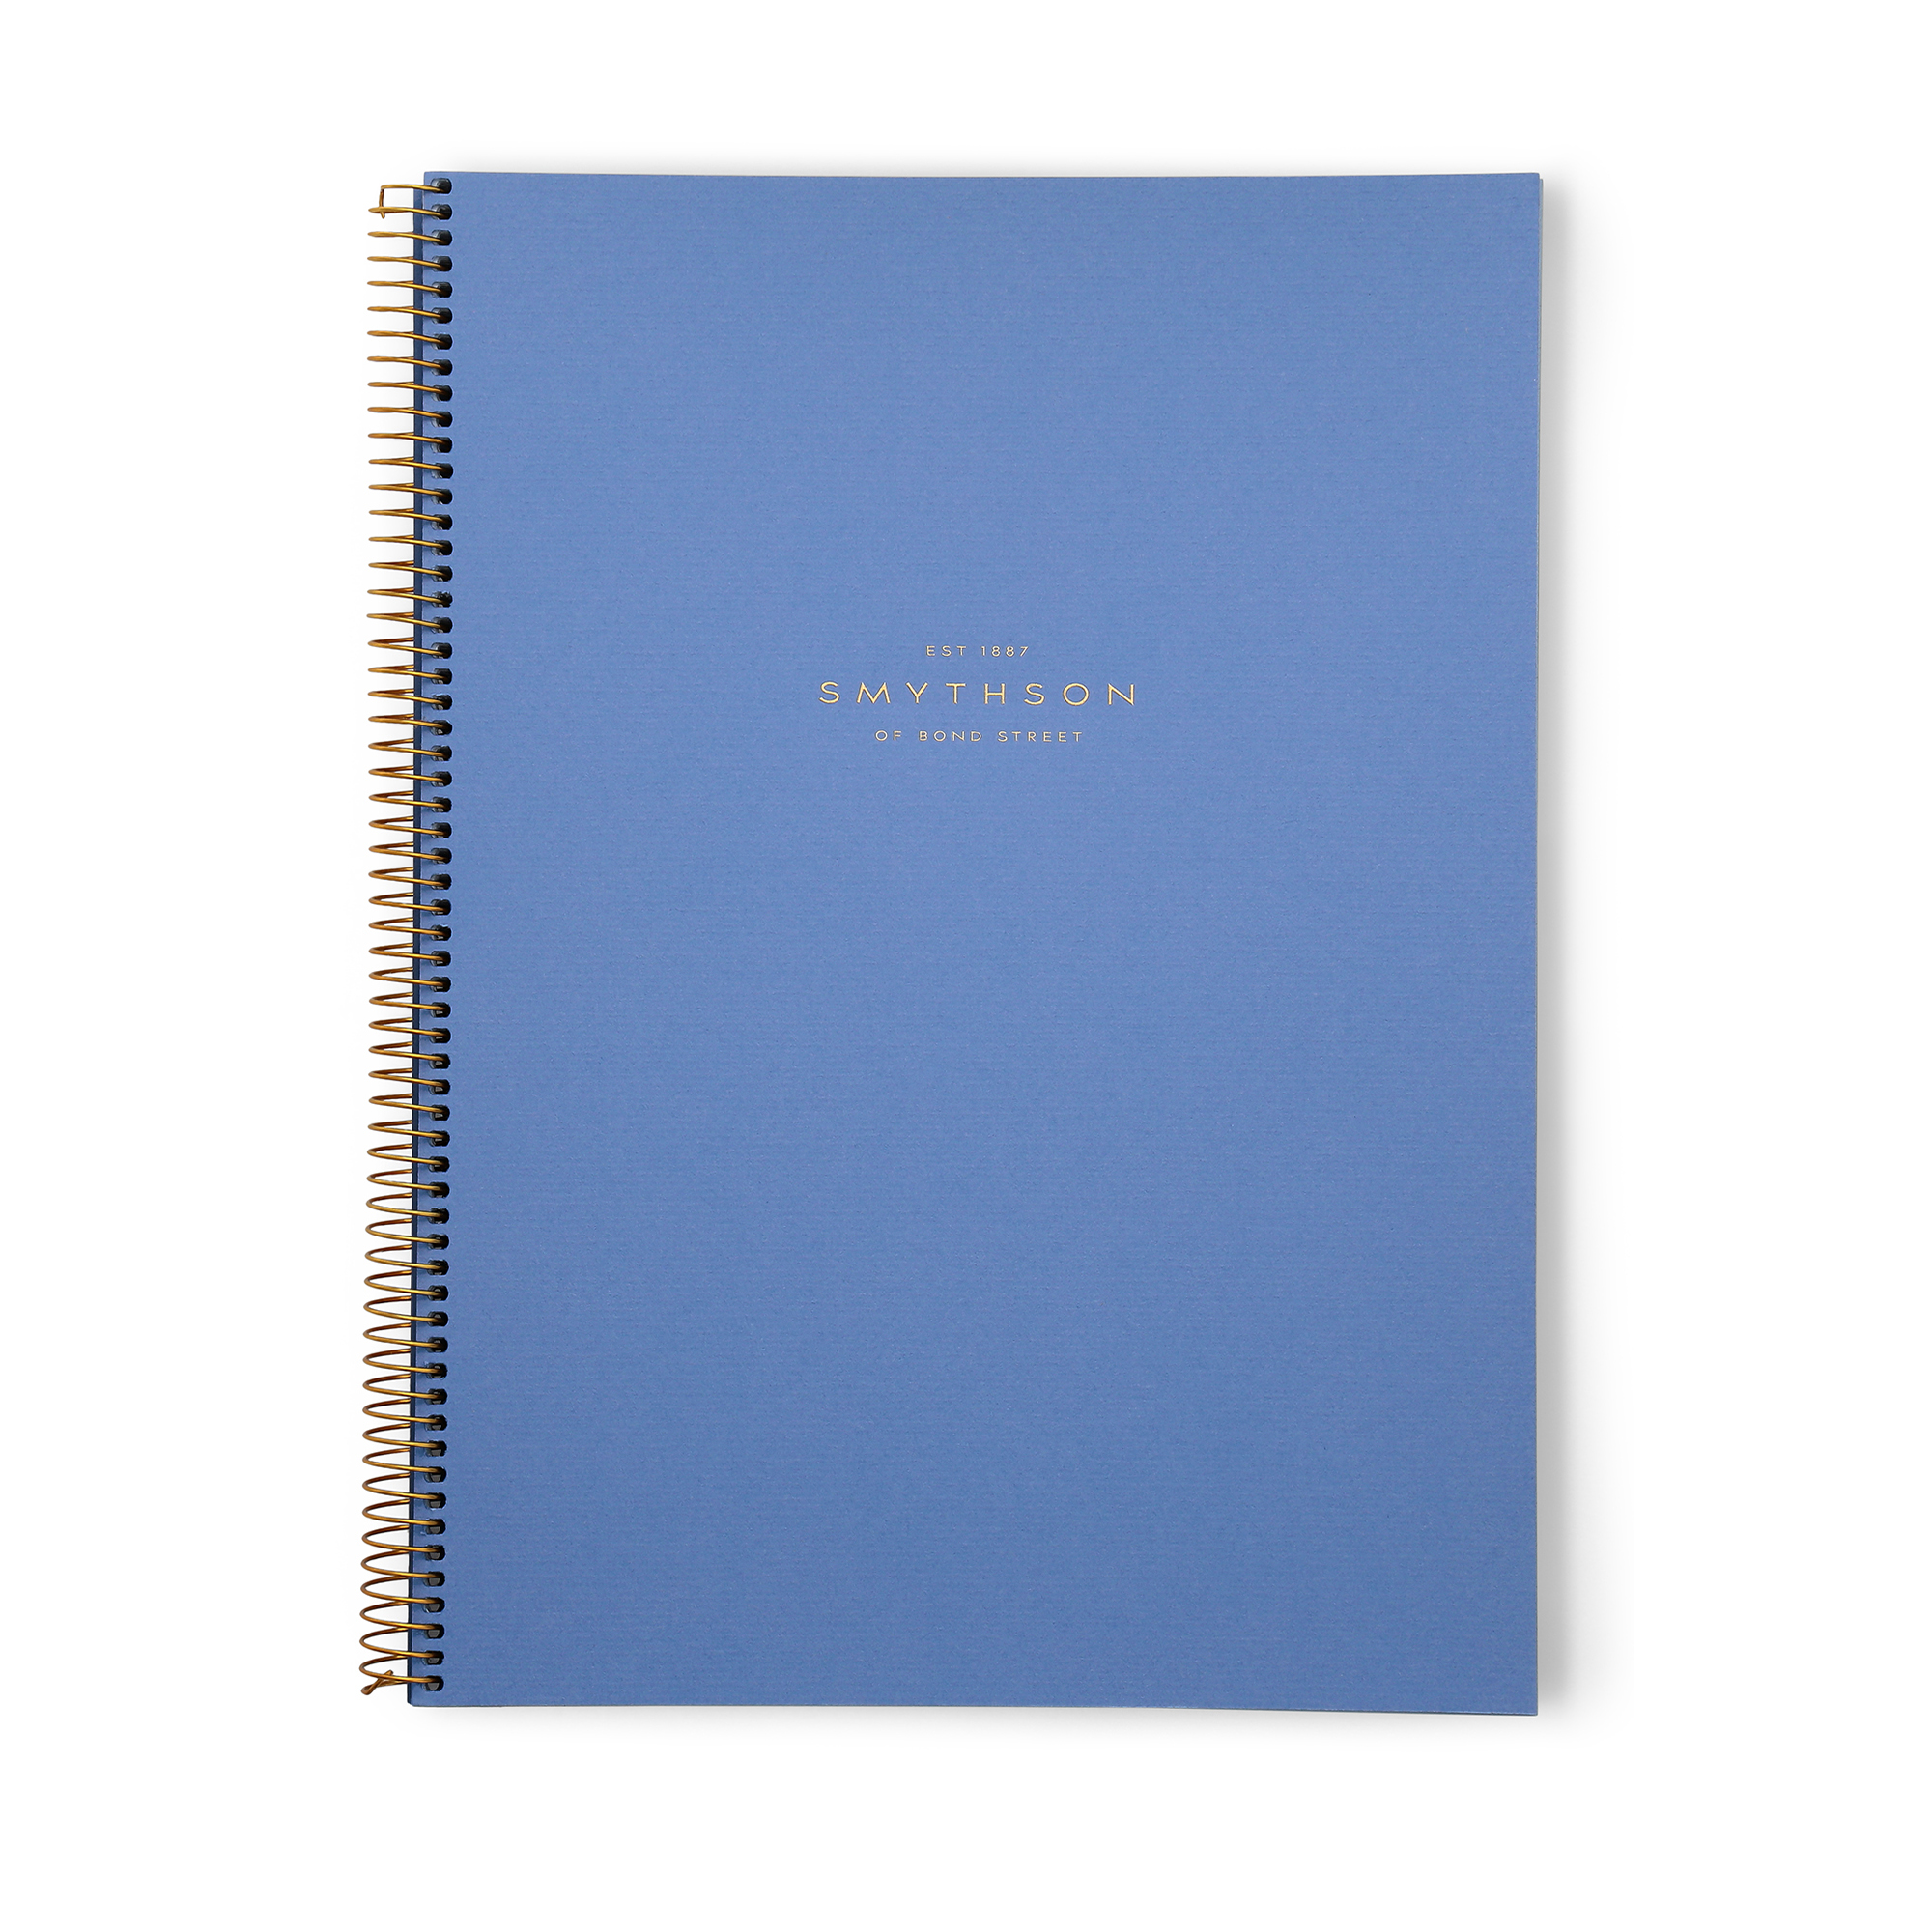 Smythson A4 Spiral Bound Refill Pad In Gold